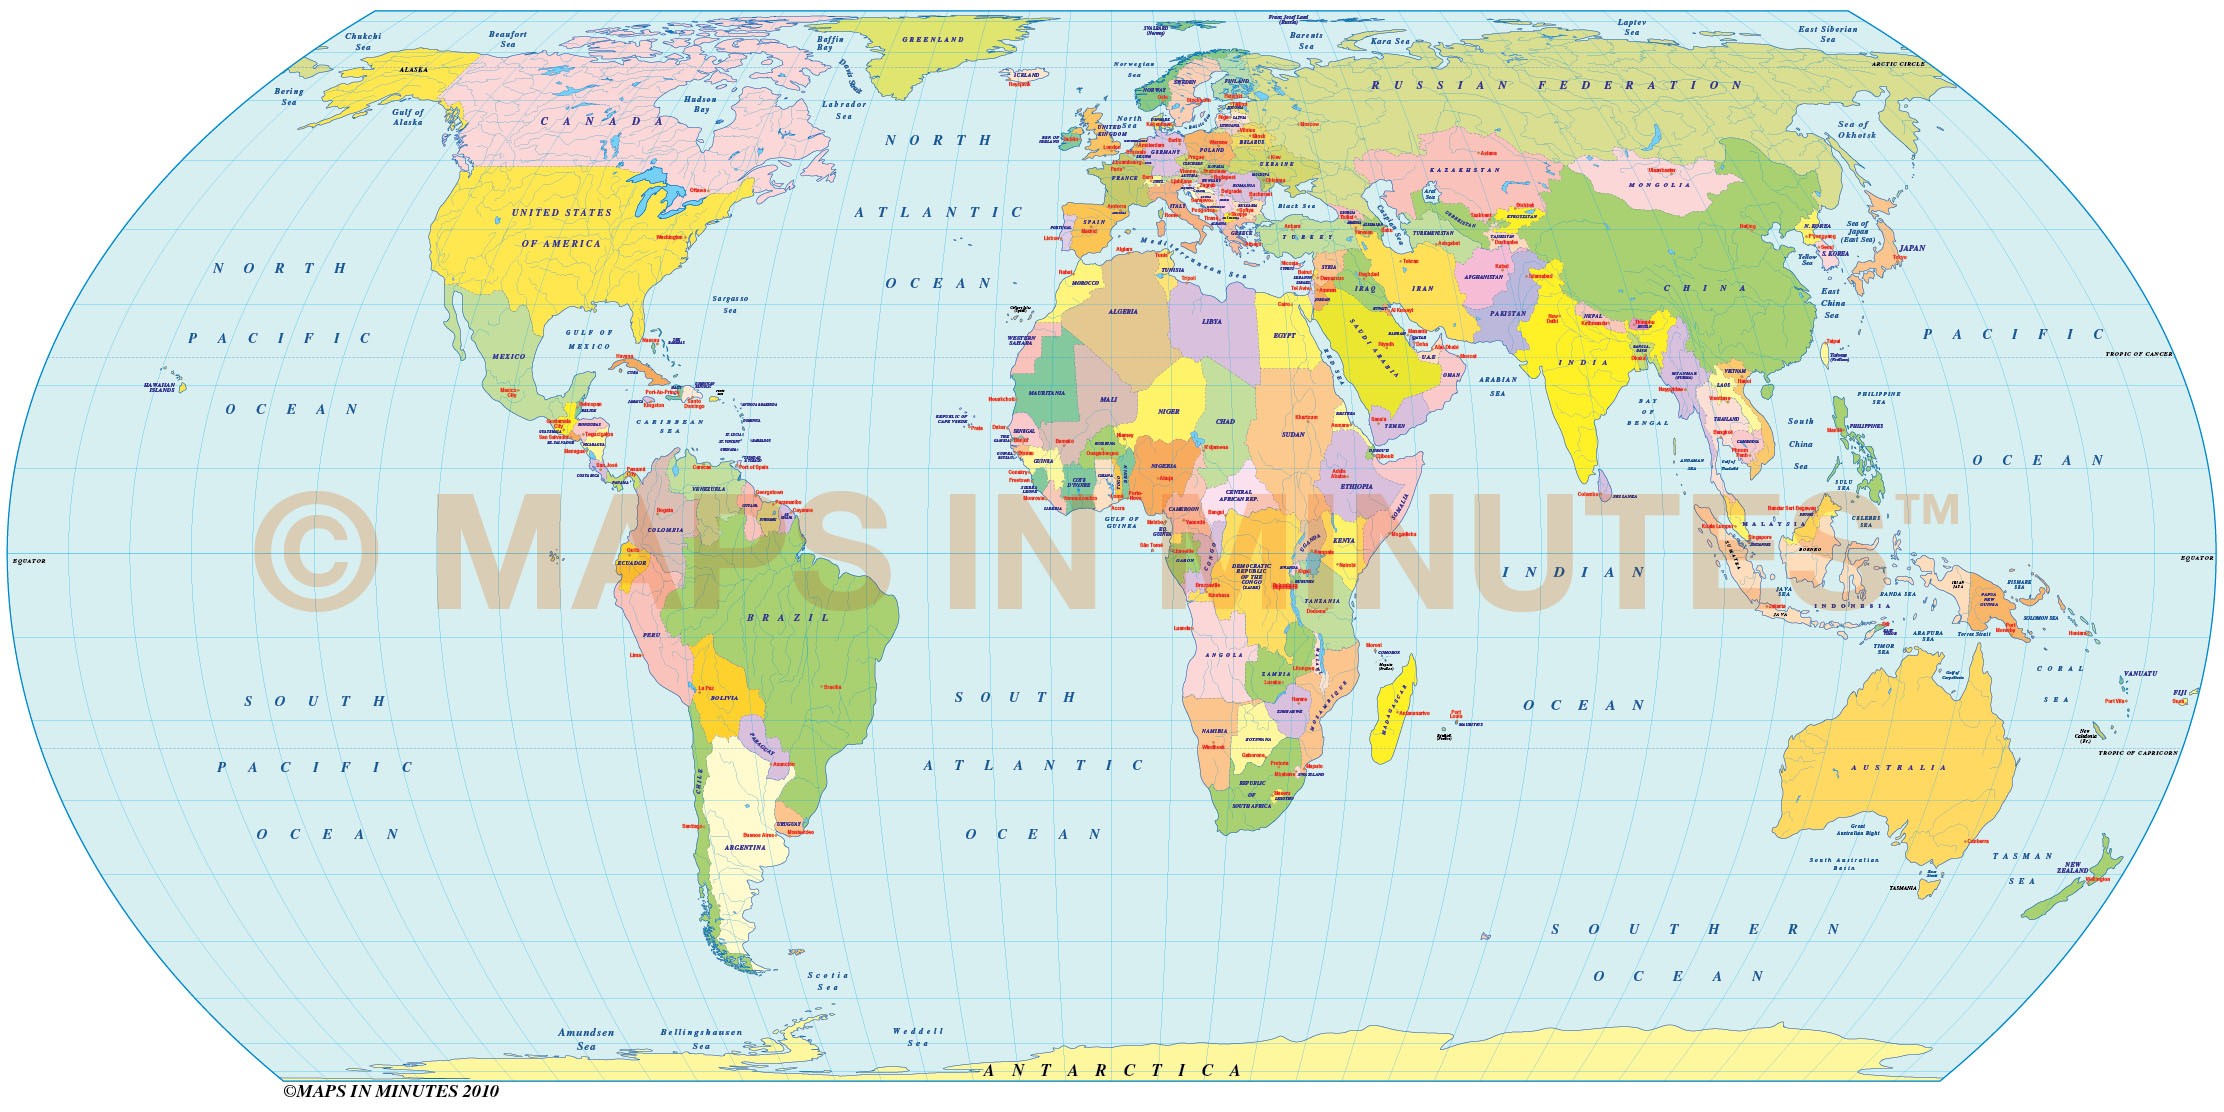 Royalty Free Hatano Projection Political World Map Small Scale Uk